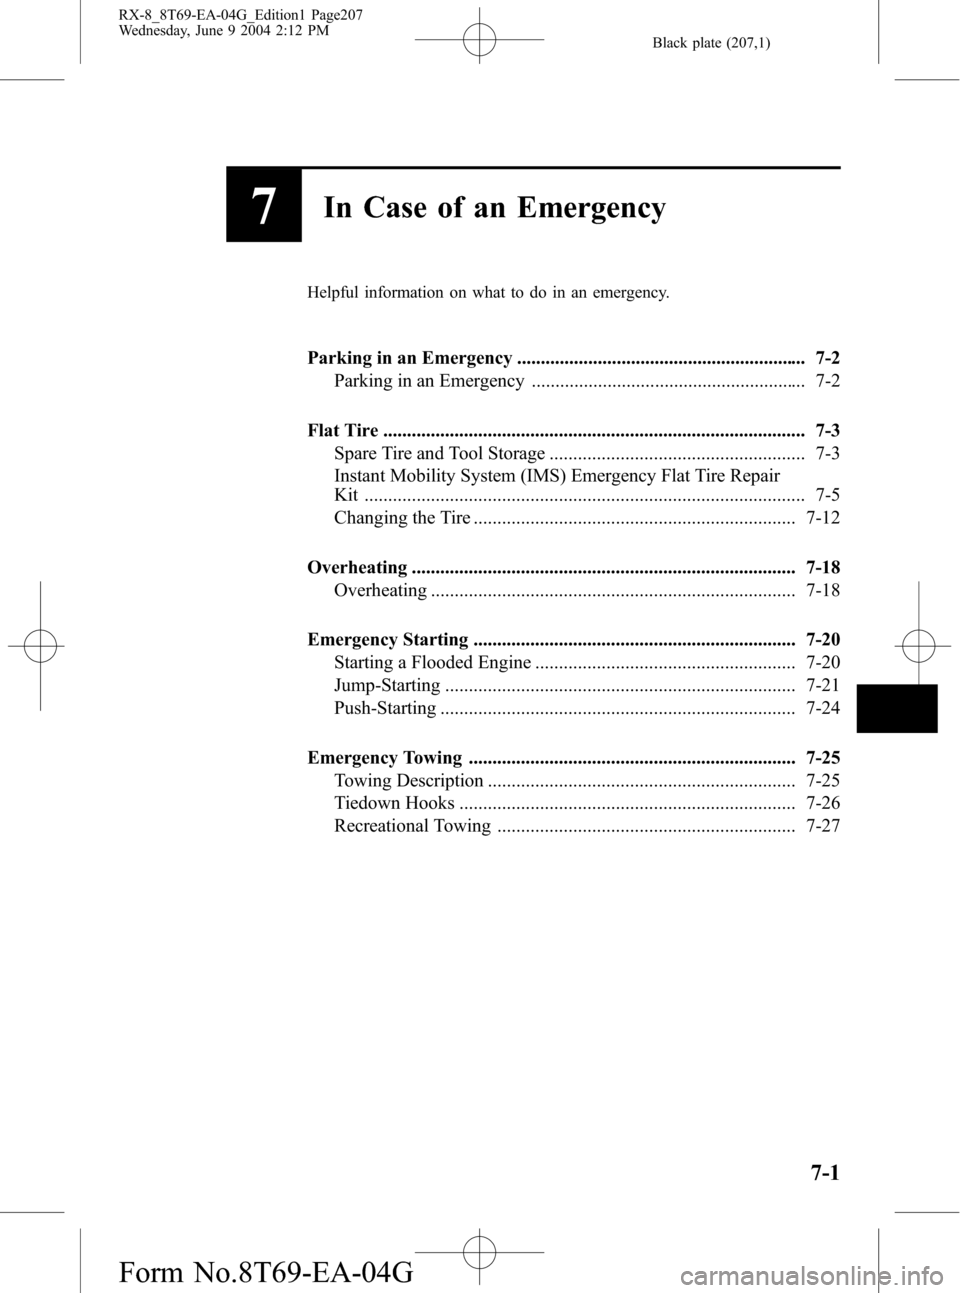 MAZDA MODEL RX 8 2005  Owners Manual (in English) Black plate (207,1)
7In Case of an Emergency
Helpful information on what to do in an emergency.
Parking in an Emergency ............................................................. 7-2
Parking in an 